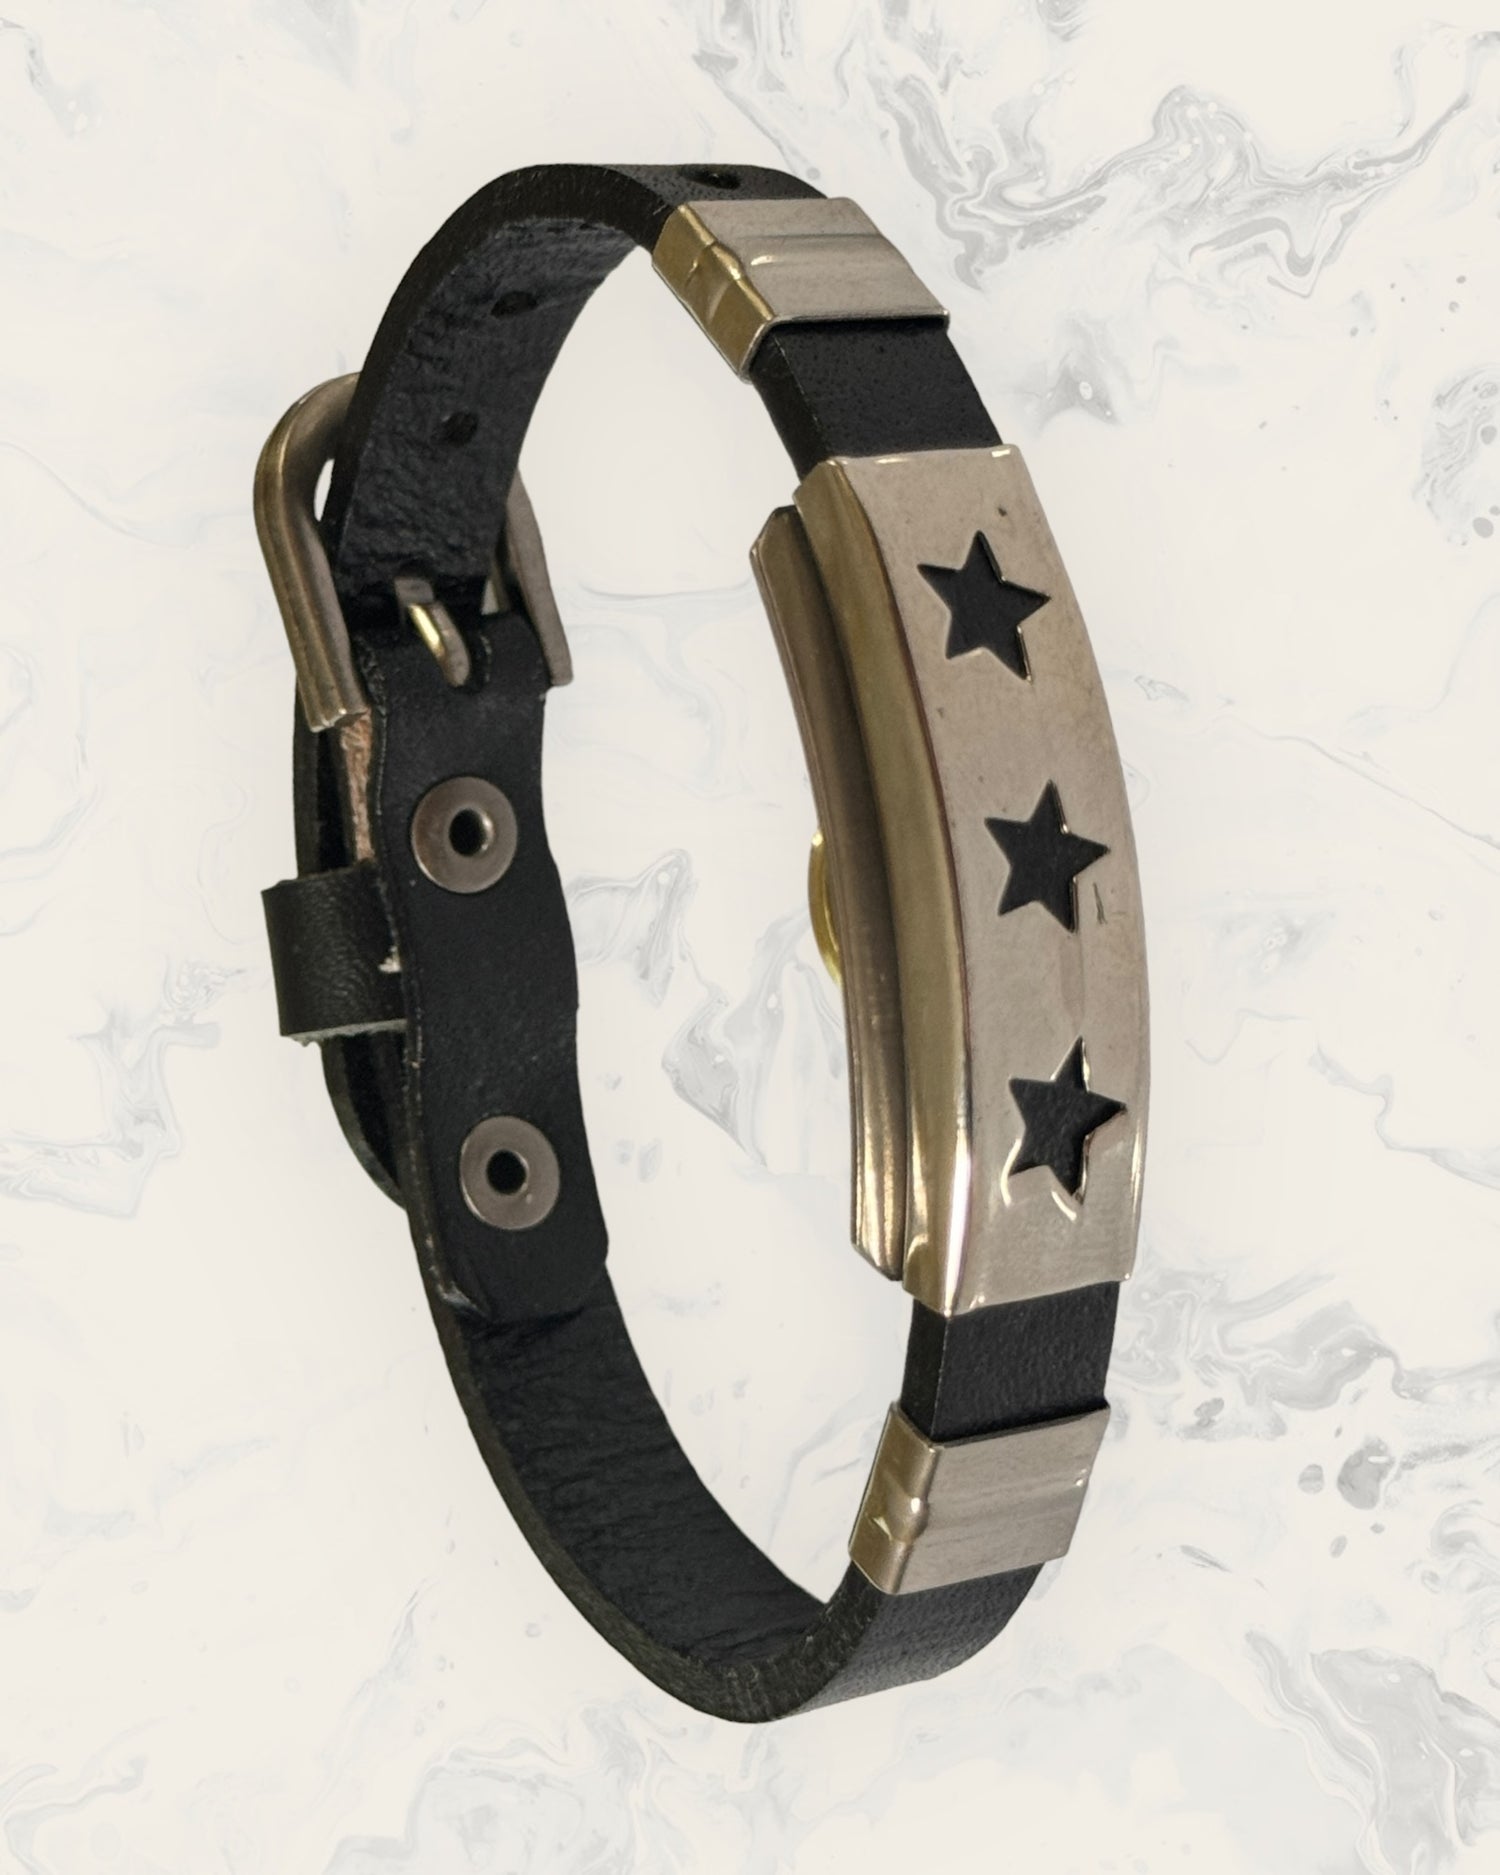 Natural Pain Relief and EMF Protection Bracelet Leather Band Color Black with a Star design on a silver metal slider